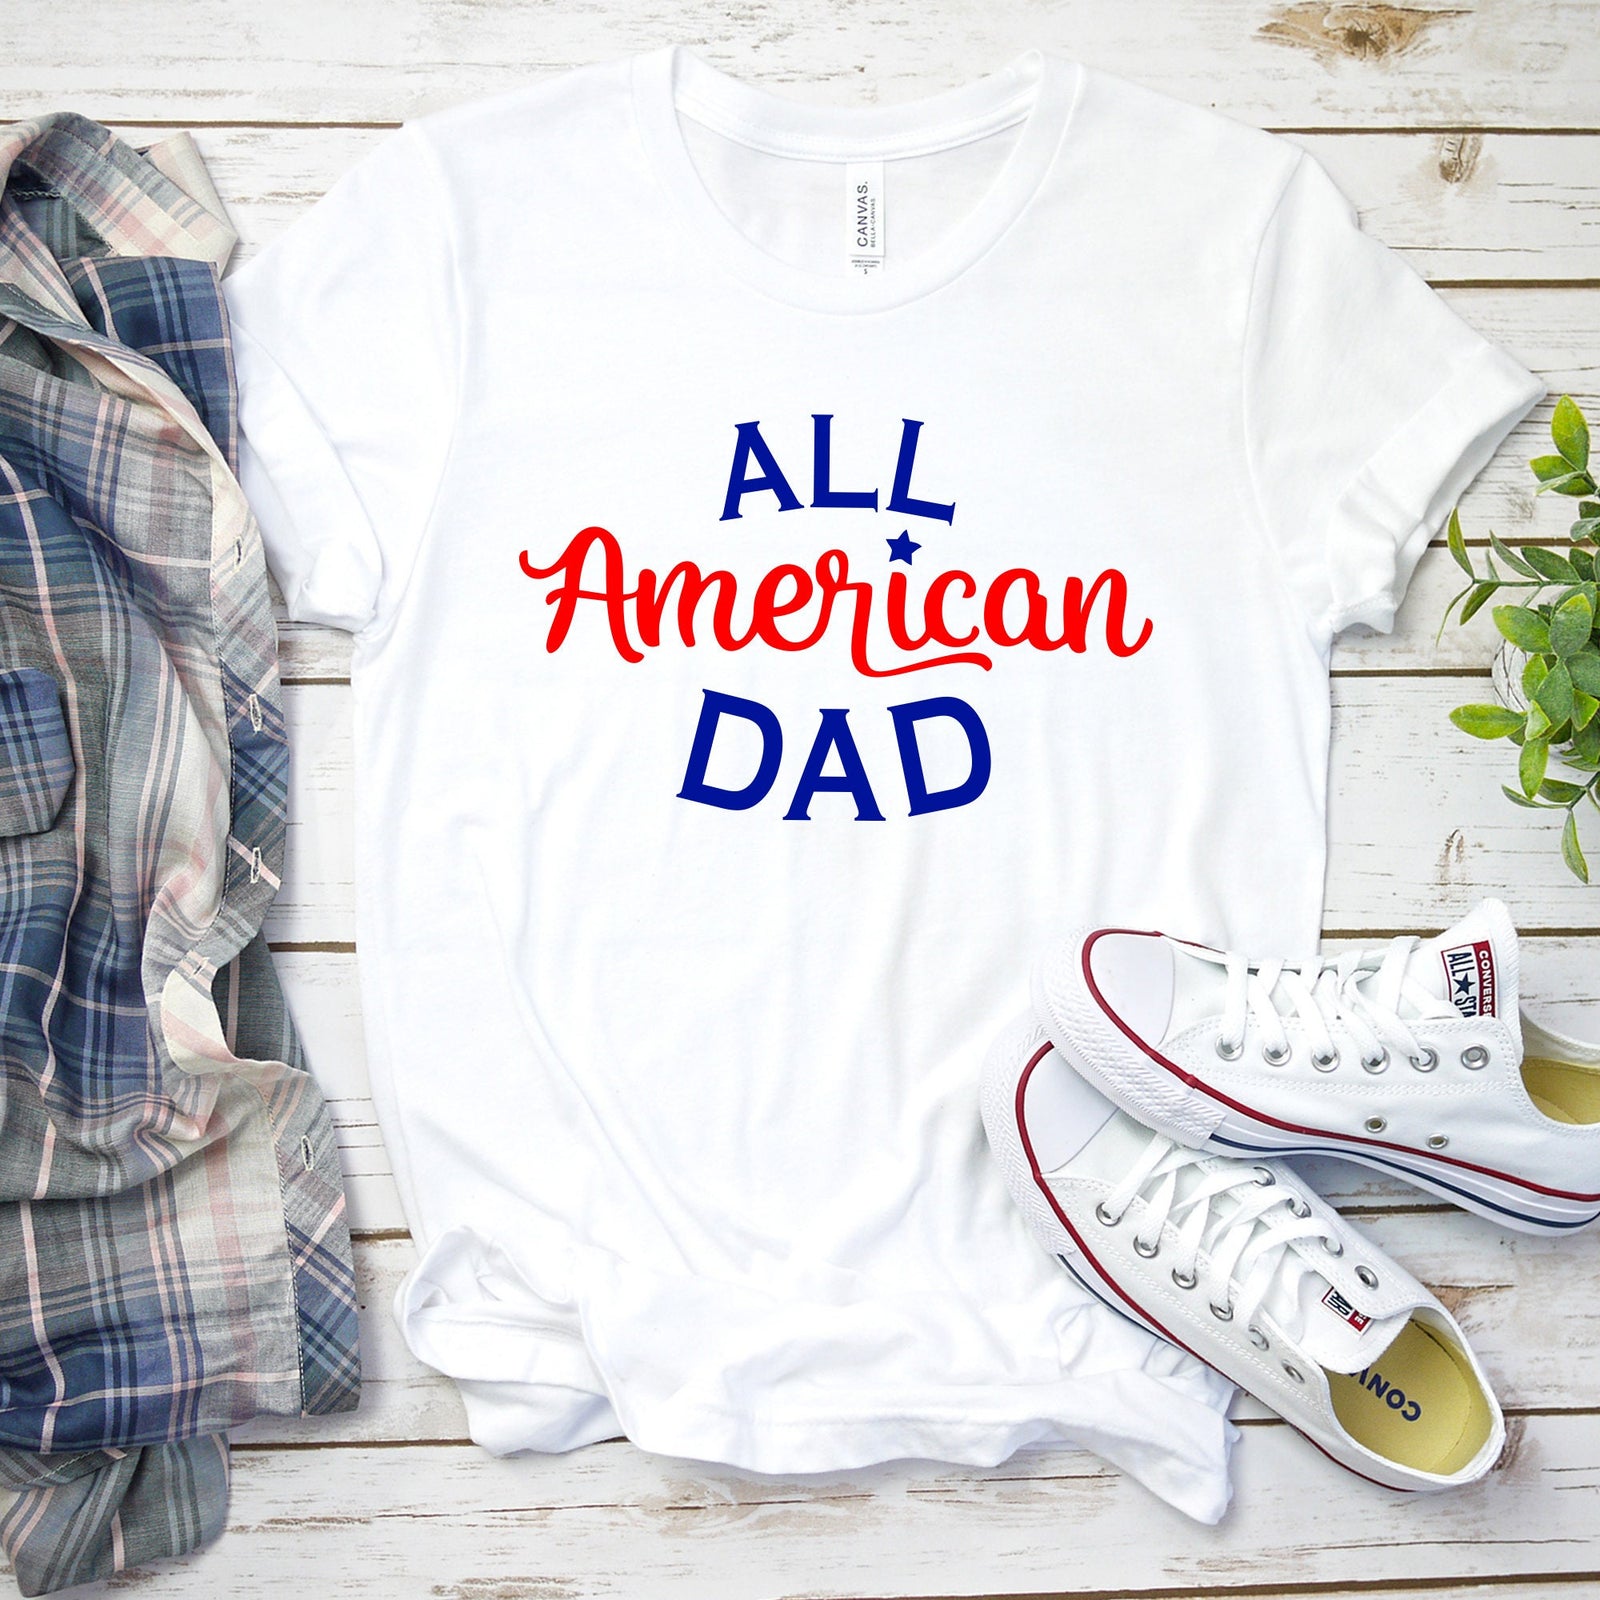 All American Dad- Fourth of July Adult T Shirt - Independence Day - Memorial - Red White and Blue